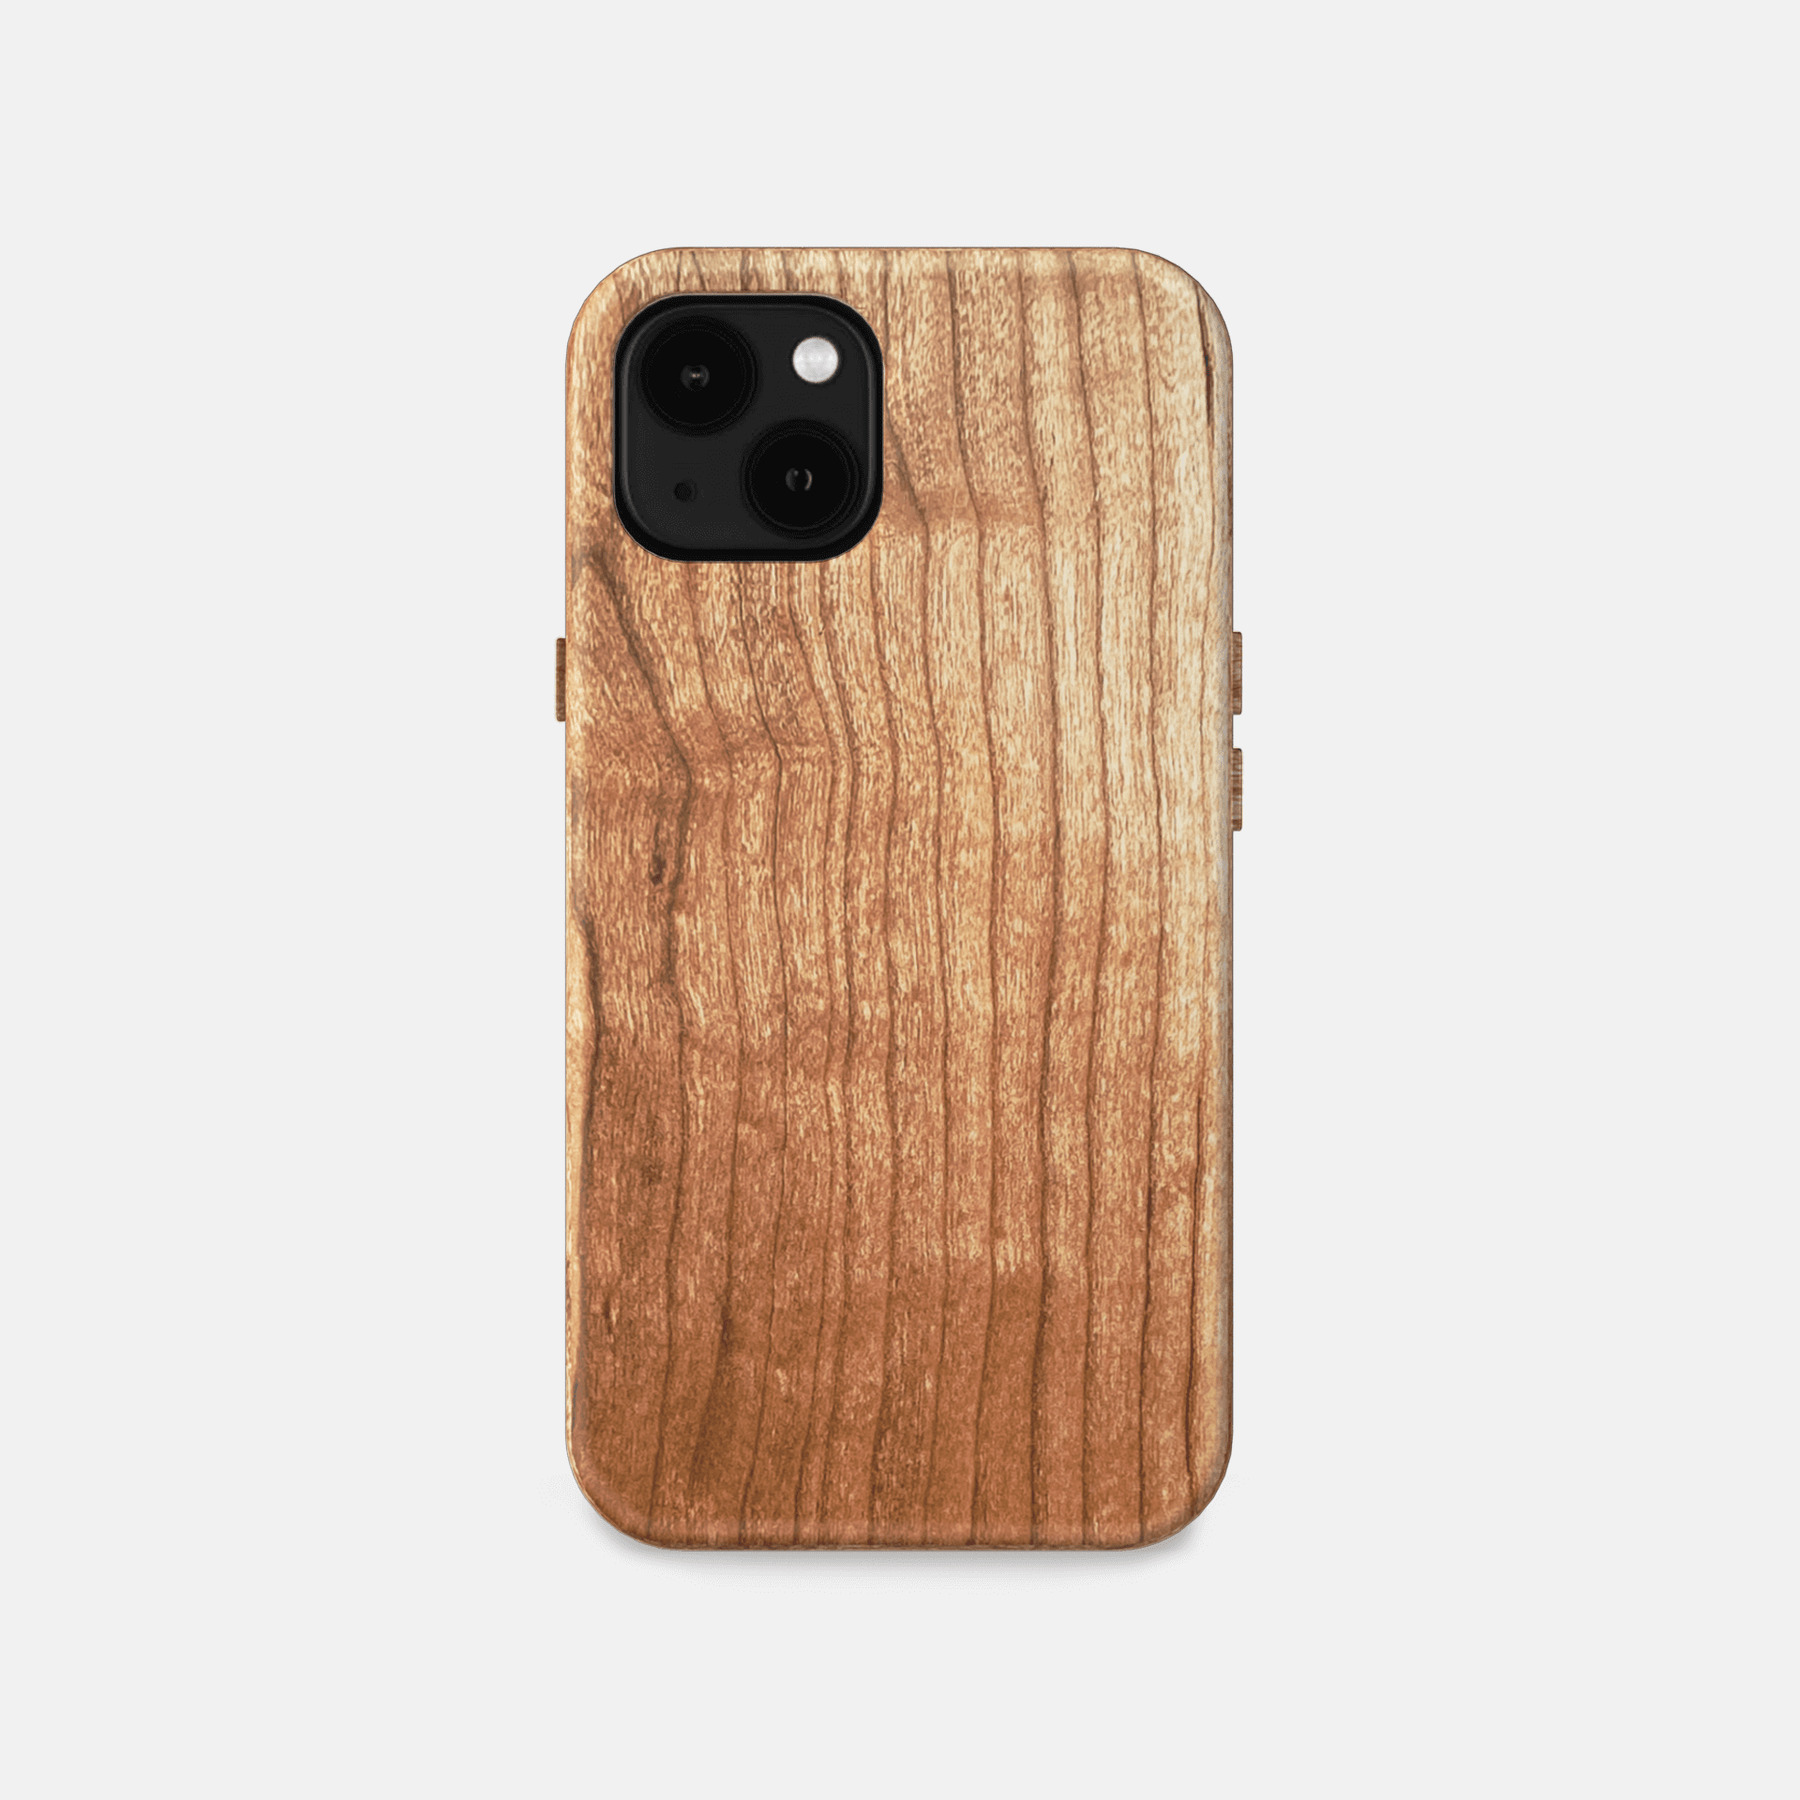 Which Case Did You Get or Recommend For Your New iPhone 15/Plus